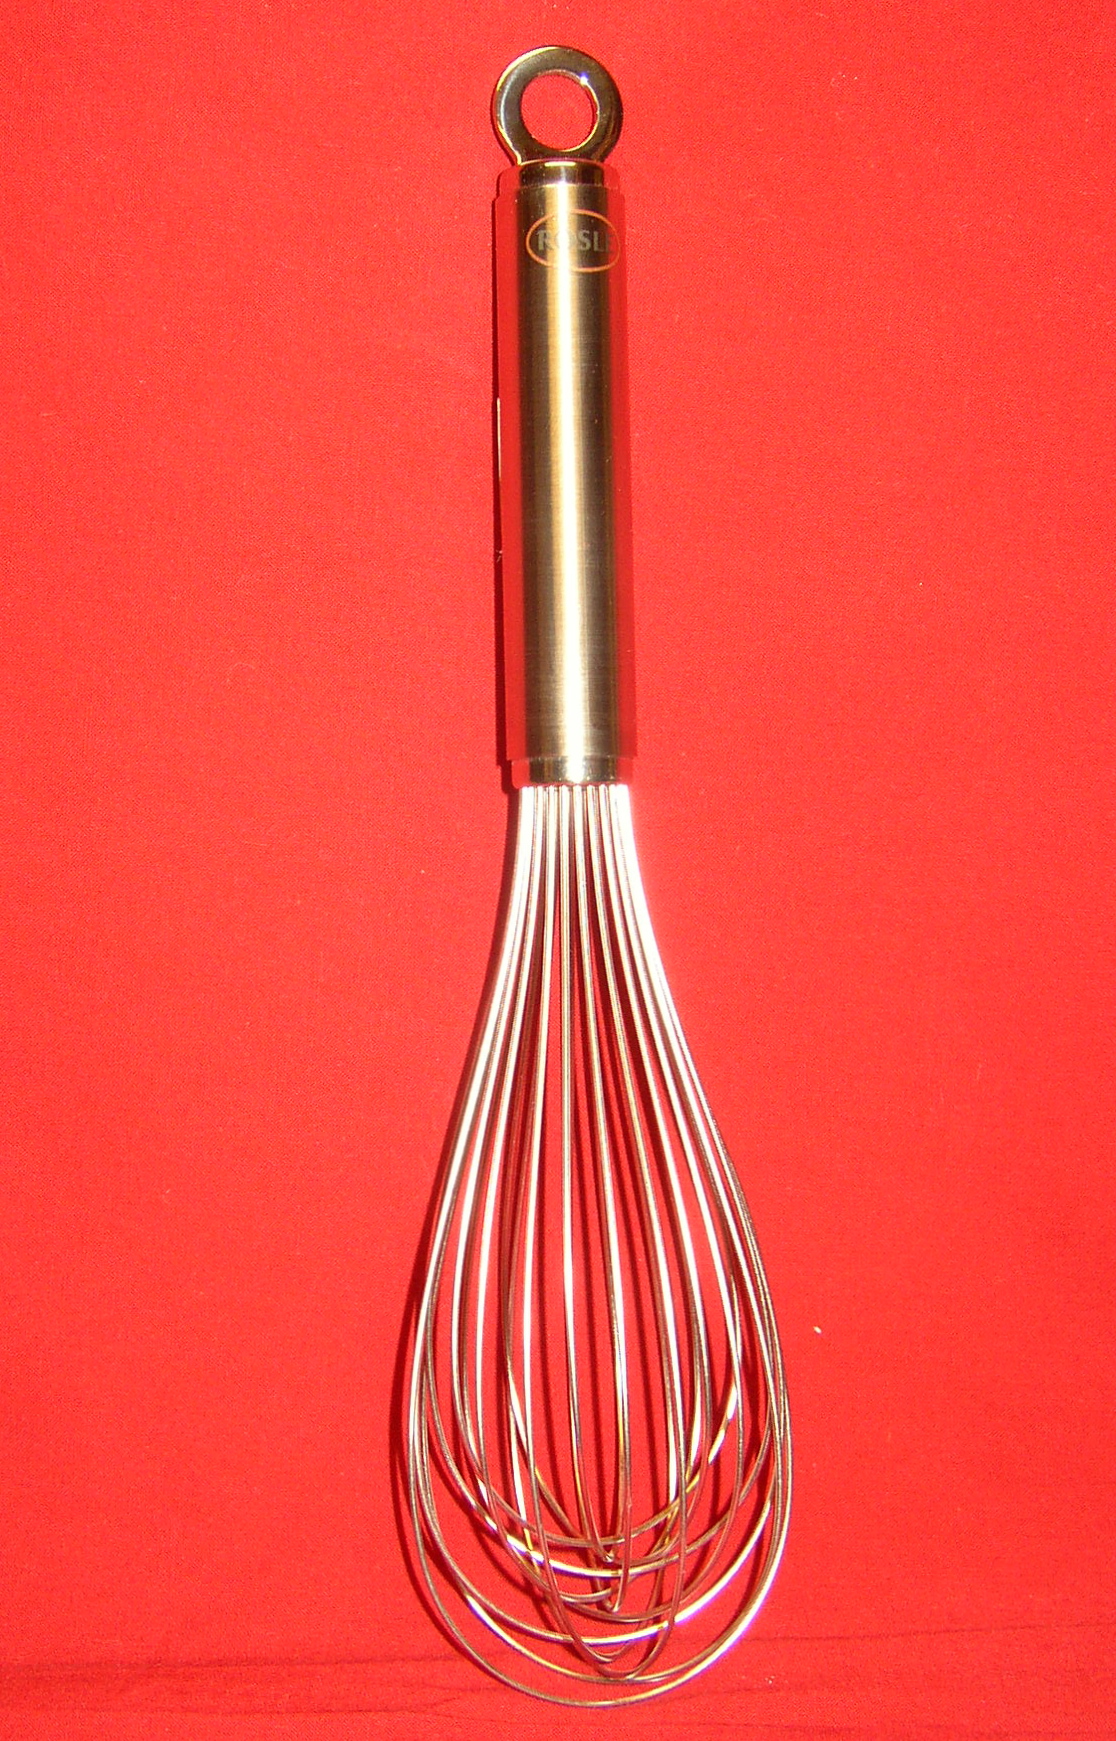 Whisk by Rösle, serious tools for serious cooks